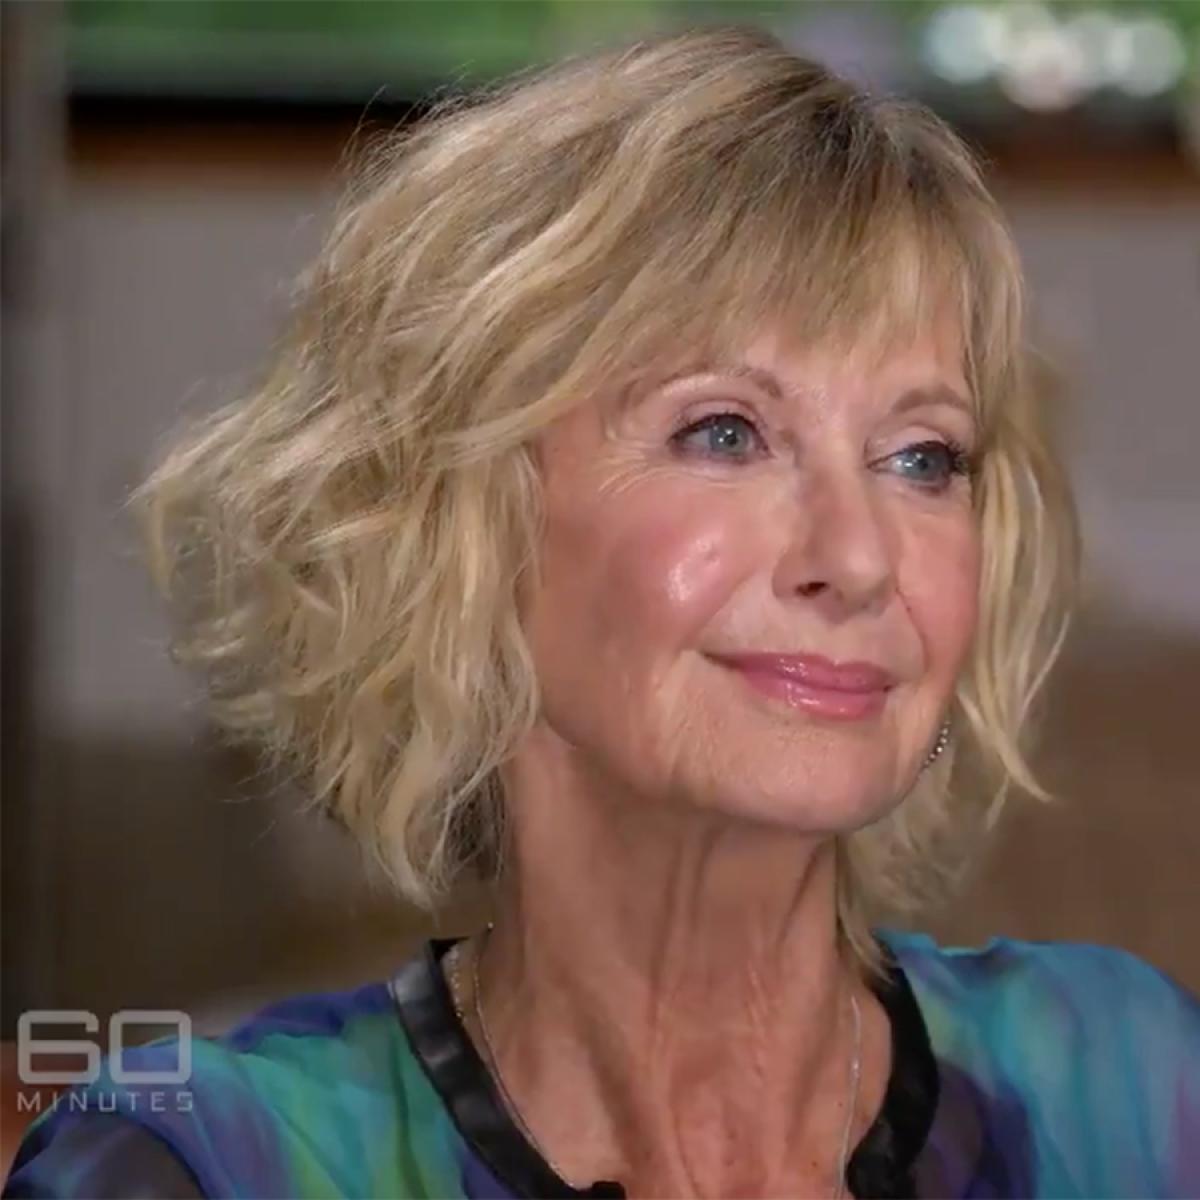 olivia newton-john reveals she is living with stage 4 cancer